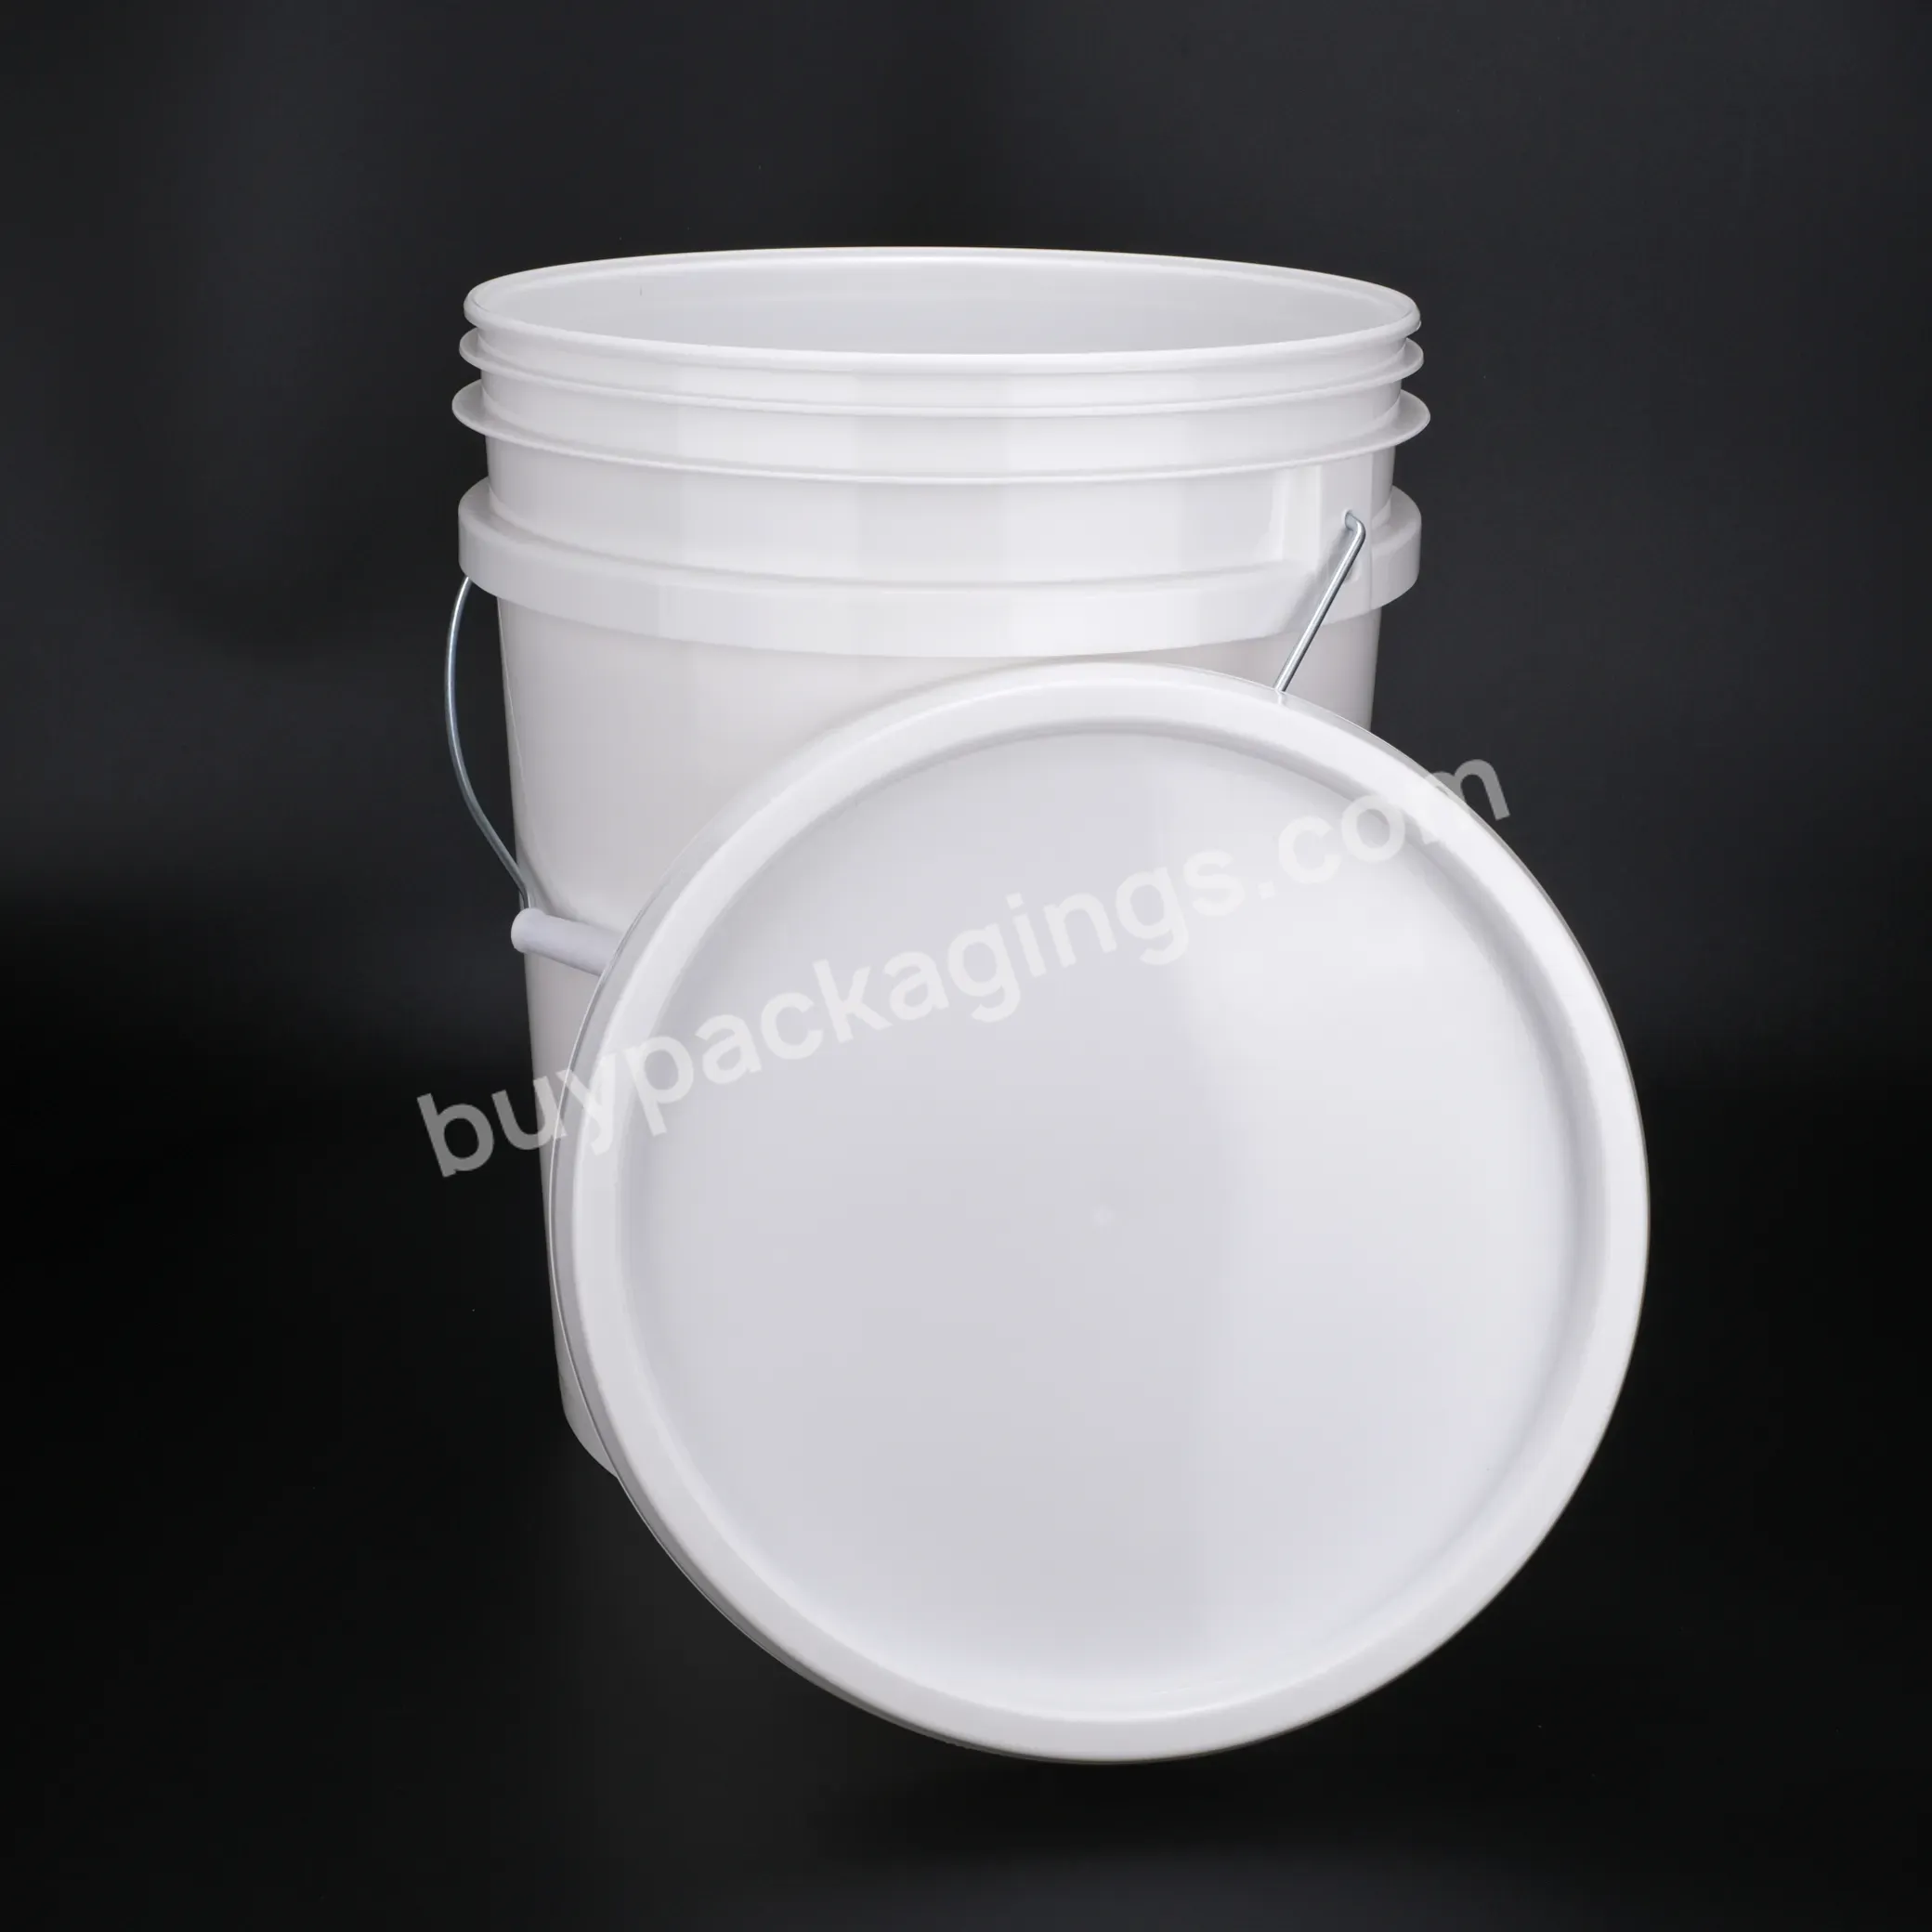 Custom Logo Drums Paint Pails Container 18l Plastic Bucket Crateandbarrel With Lid And Handle